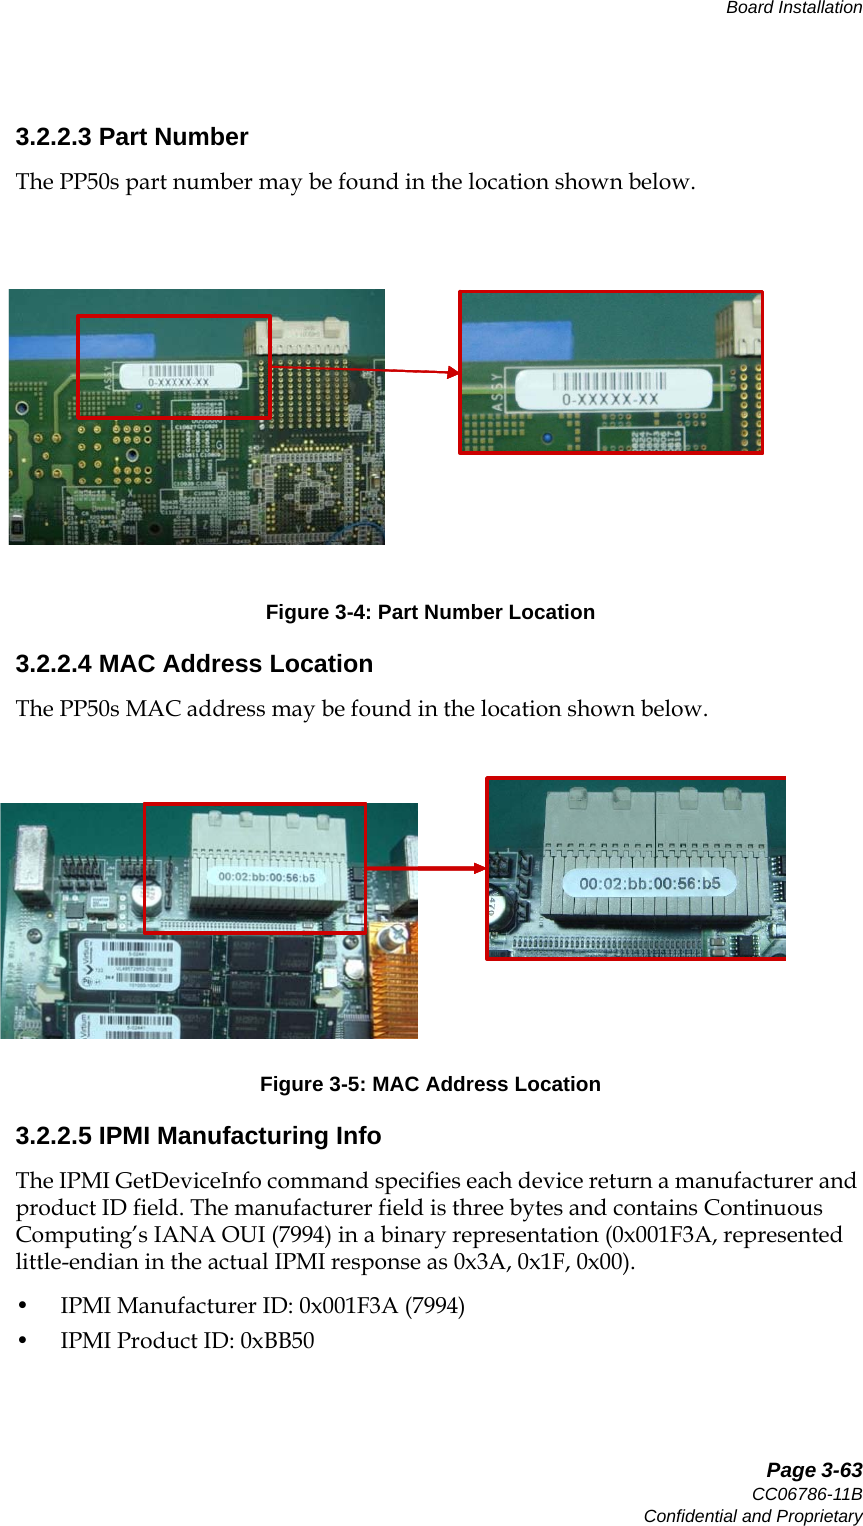   Page 3-63CC06786-11BConfidential and ProprietaryBoard Installation14ABABPreliminary3.2.2.3 Part NumberThe PP50s part number may be found in the location shown below.  3.2.2.4 MAC Address LocationThe PP50s MAC address may be found in the location shown below.  3.2.2.5 IPMI Manufacturing InfoThe IPMI GetDeviceInfo command specifies each device return a manufacturer and product ID field. The manufacturer field is three bytes and contains Continuous Computing’s IANA OUI (7994) in a binary representation (0x001F3A, represented little-endian in the actual IPMI response as 0x3A, 0x1F, 0x00). • IPMI Manufacturer ID: 0x001F3A (7994)• IPMI Product ID: 0xBB50 Figure 3-4: Part Number LocationFigure 3-5: MAC Address Location